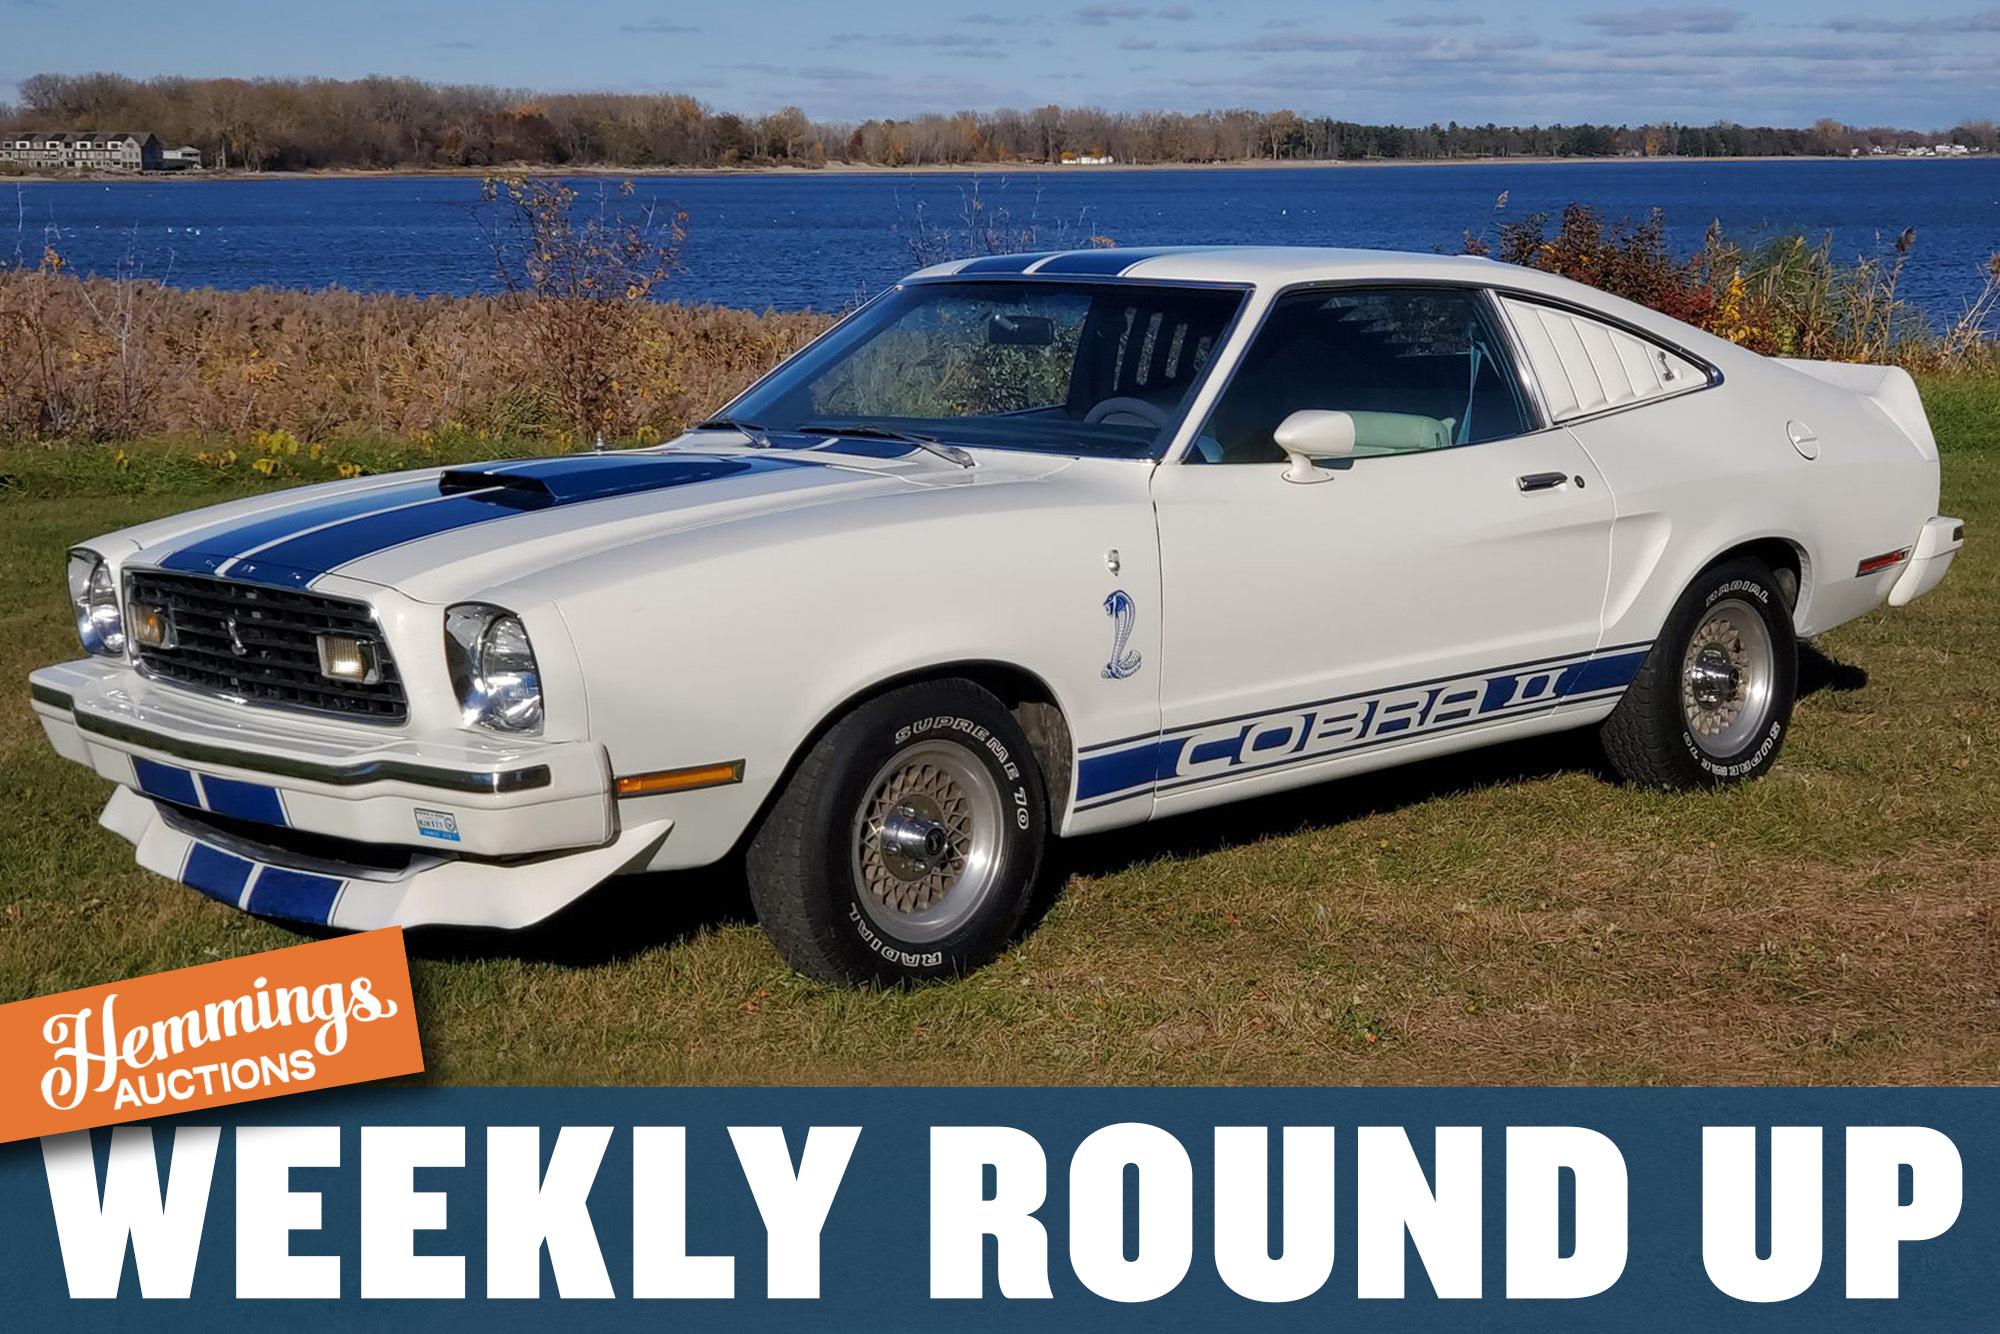 A V-6 Ford Mustang Cobra II, upgraded Toyota Land Cruiser, and GMC Suburban pickup: Hemmings Auctions Weekly Round Up for November 27-December 3, 2022